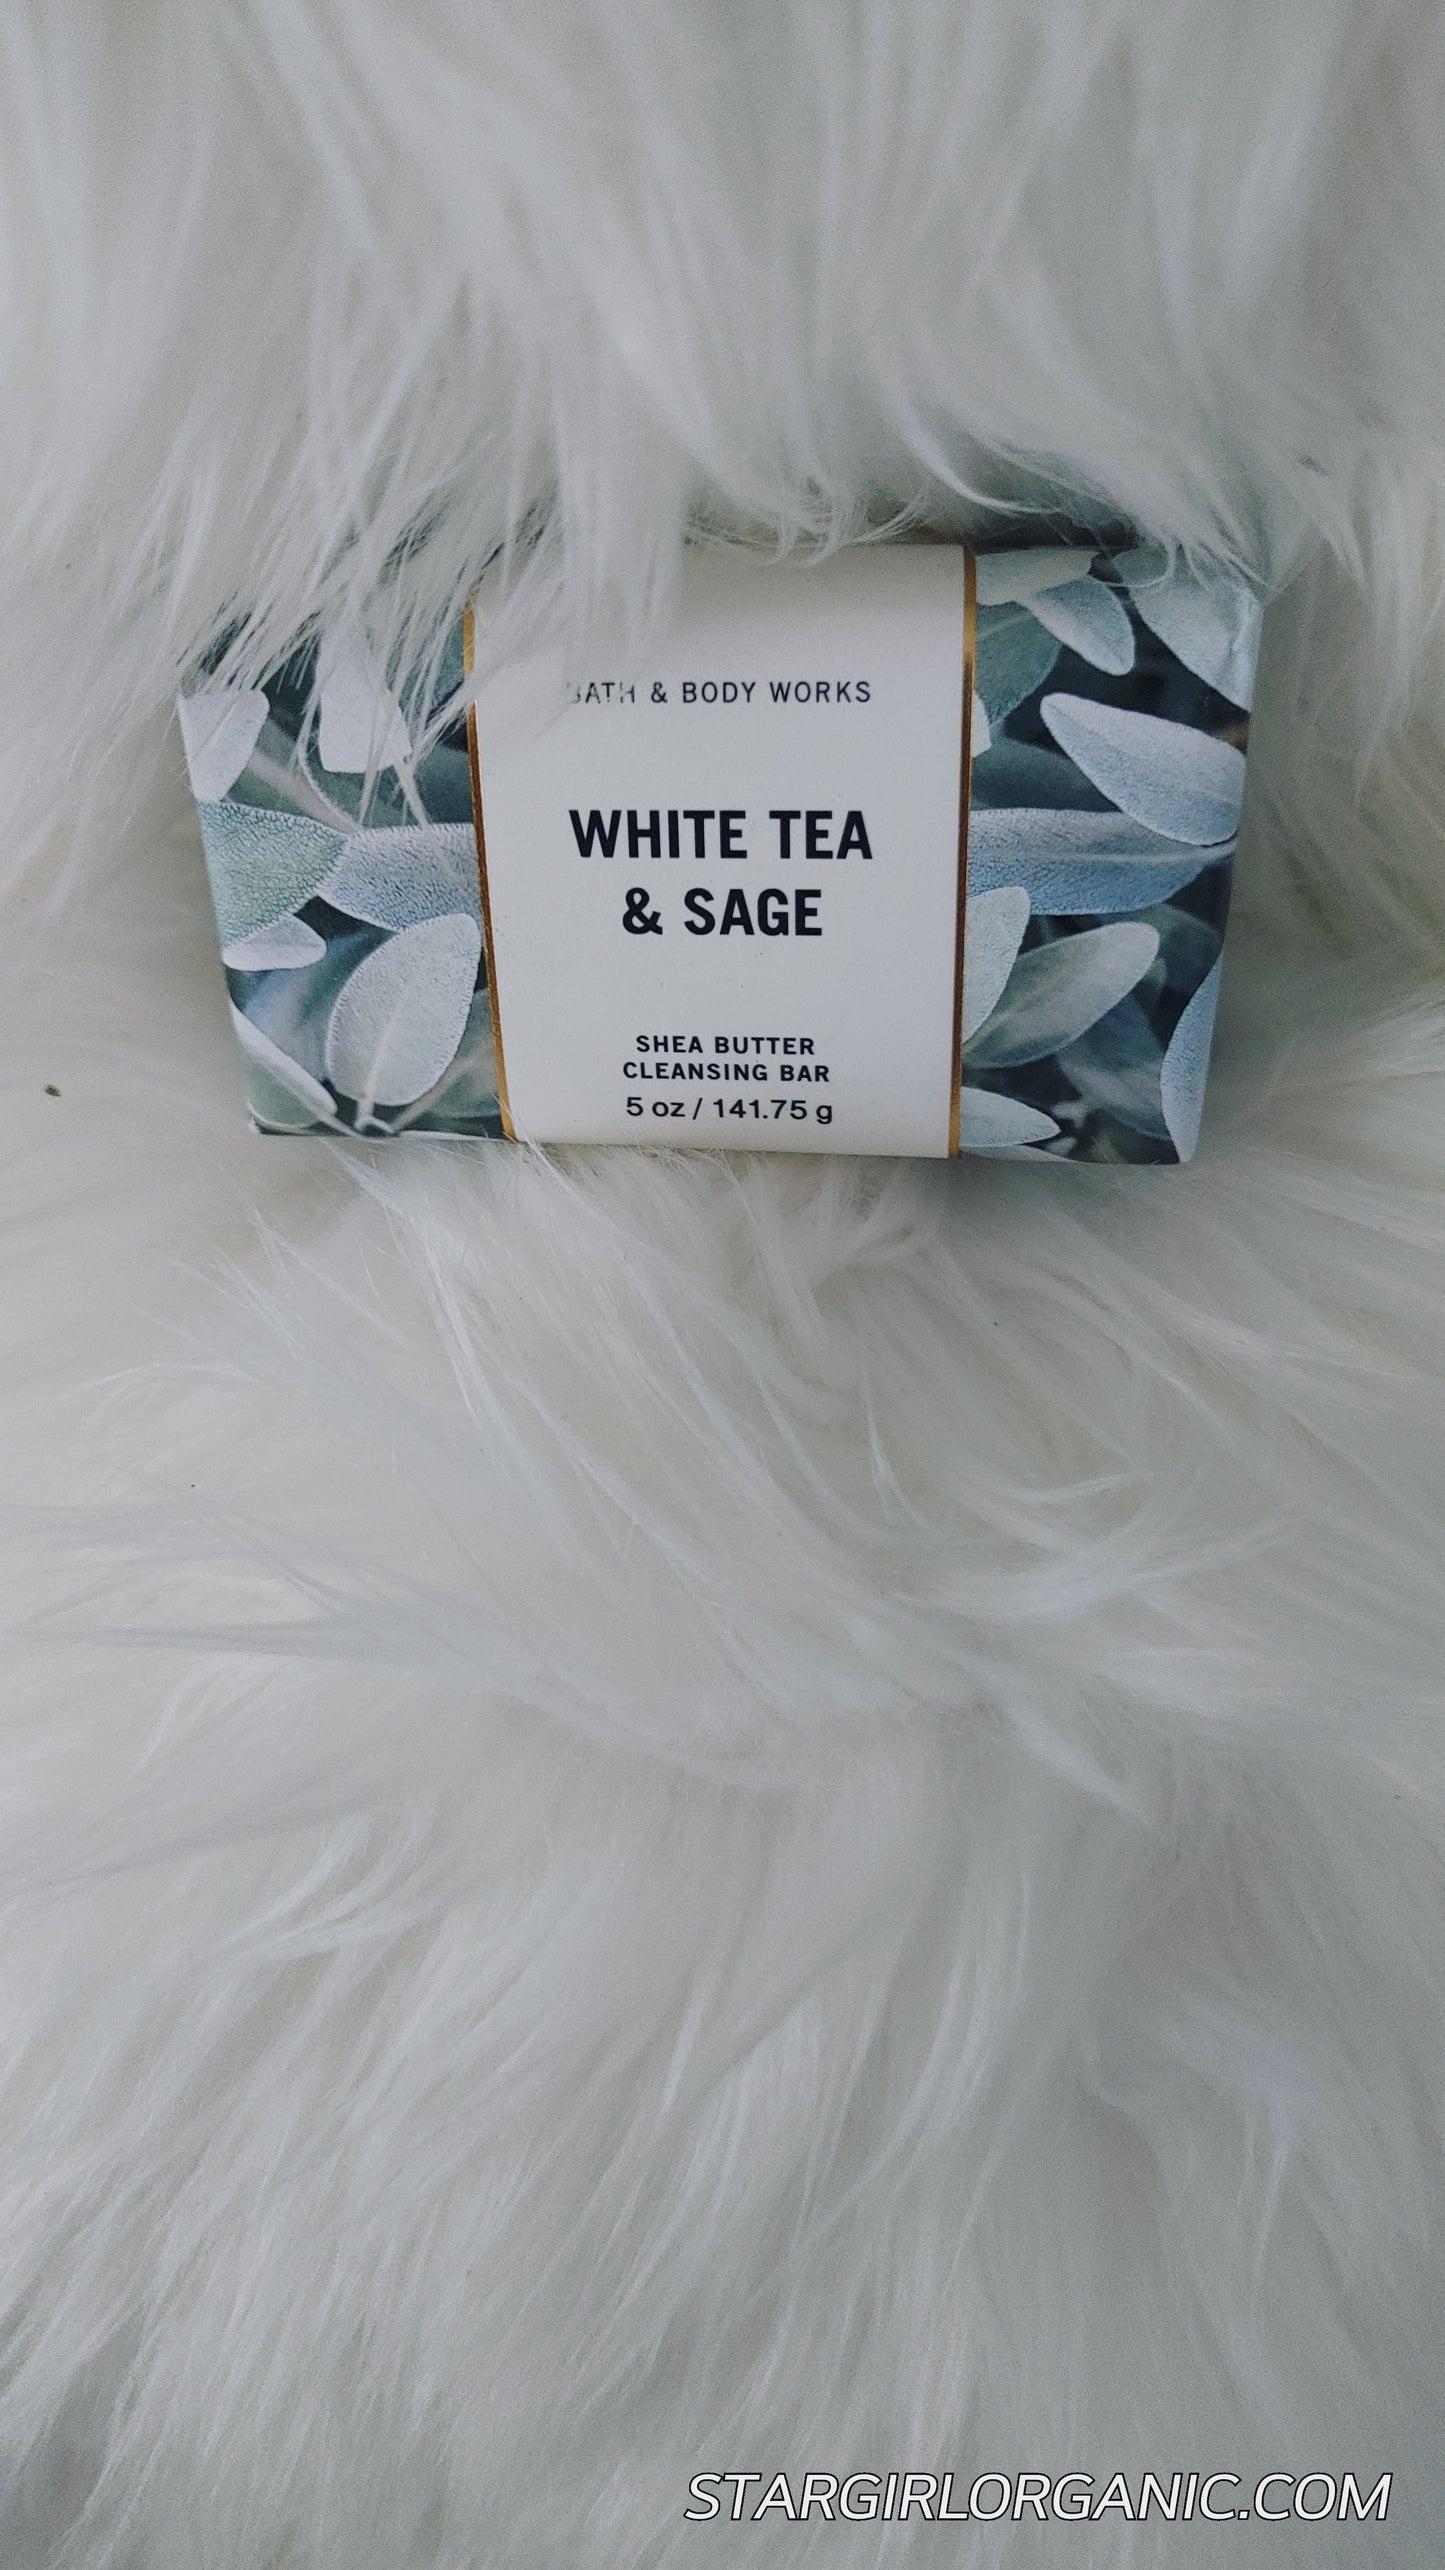 White Tea and Sage Shea Butter Cleansing Bar